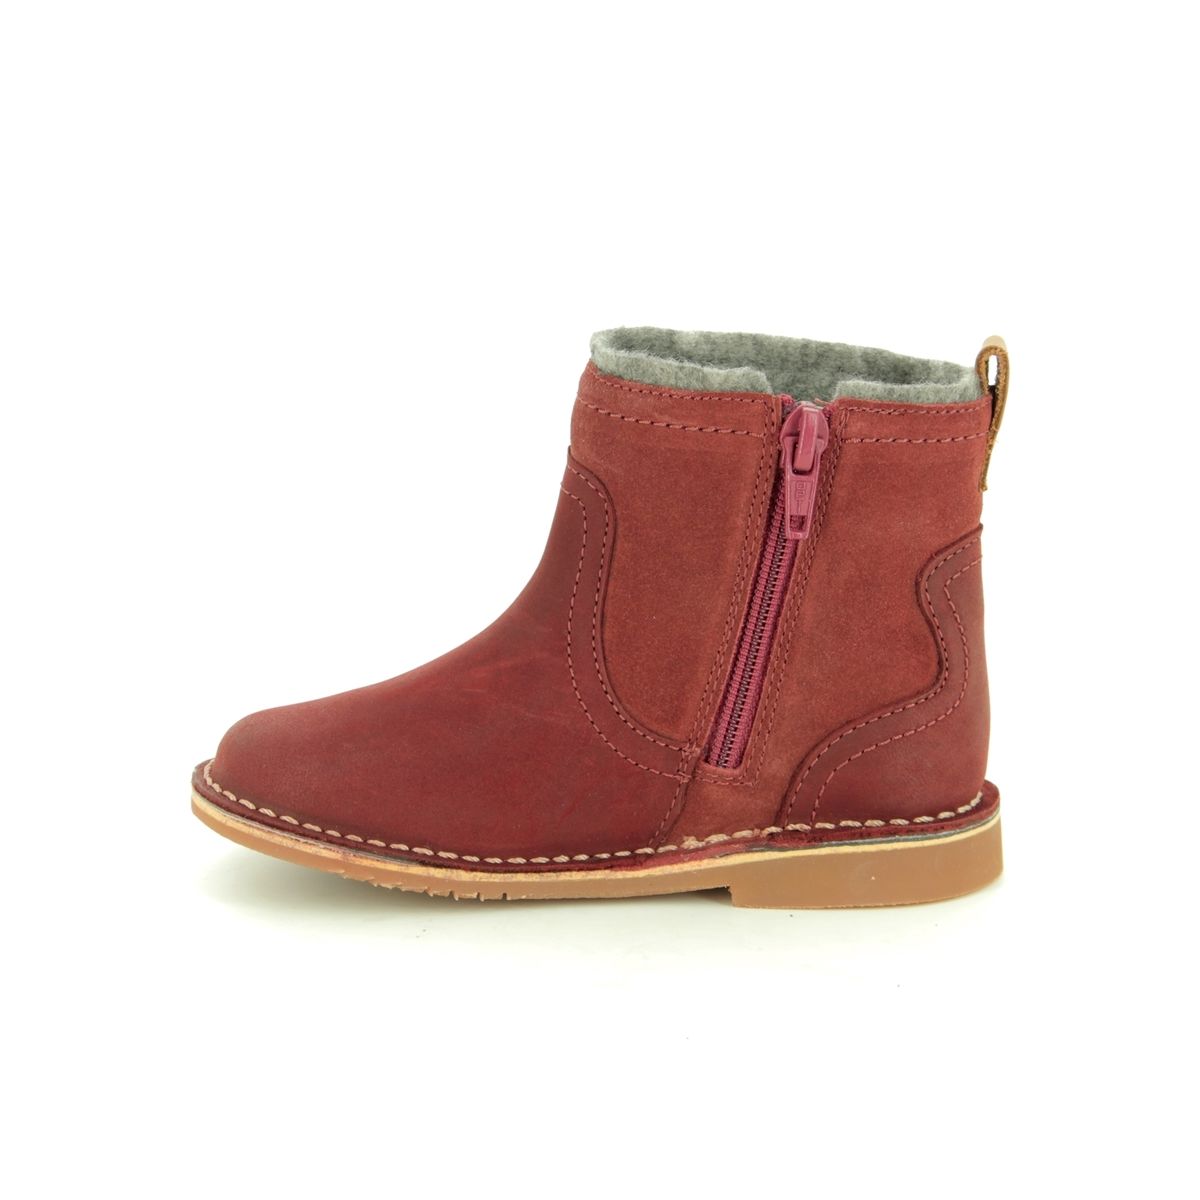 Details about   Clarks Girls Leather Ankle Boots 'Comet Frost'